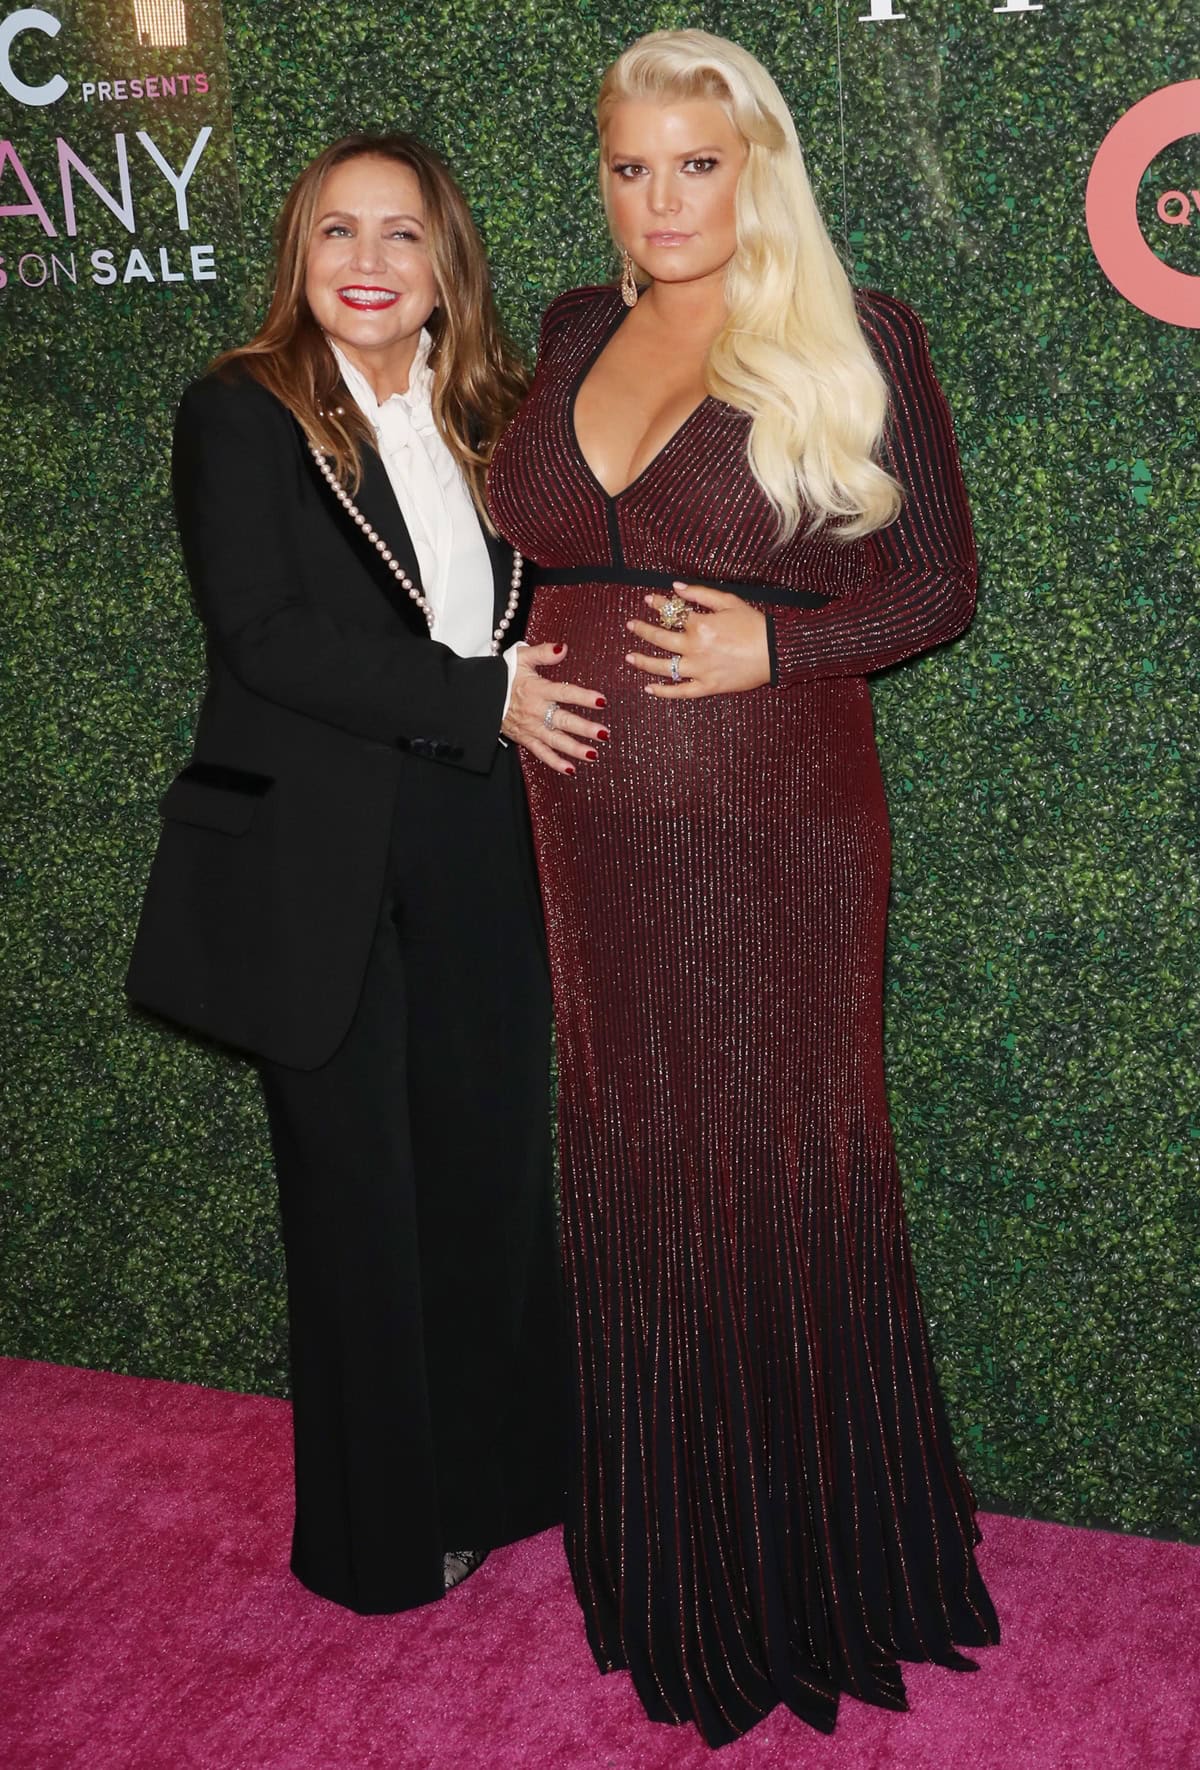 Tina Simpson and her daughter, Jessica Simpson, attend the 25th Annual QVC "FFANY Shoes on Sale" Gala